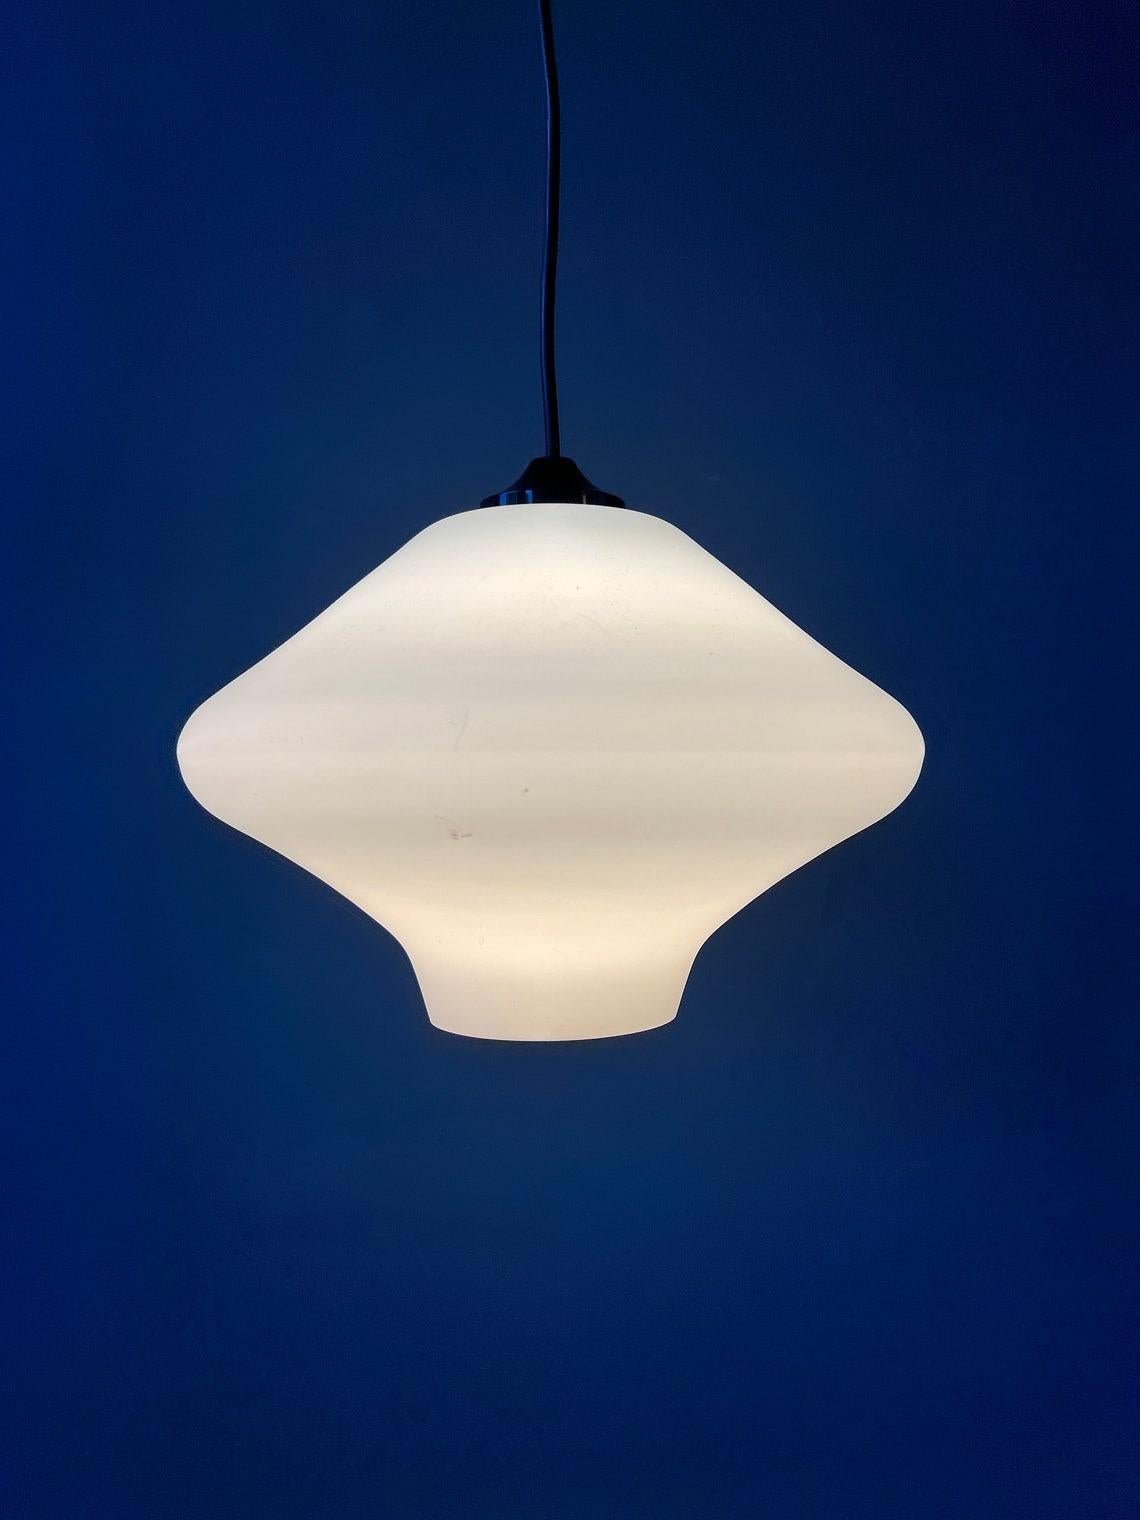 Vintage danish style milk glass pendant light. The lamp requires an E27/26 (standard) lightbulb.

Additional information:
Materials: Glass, wood
Period: 1970s
Dimensions: ø Shade: 25 cm
Height Shade: 28 cm
Condition: Very good. The glass is still in